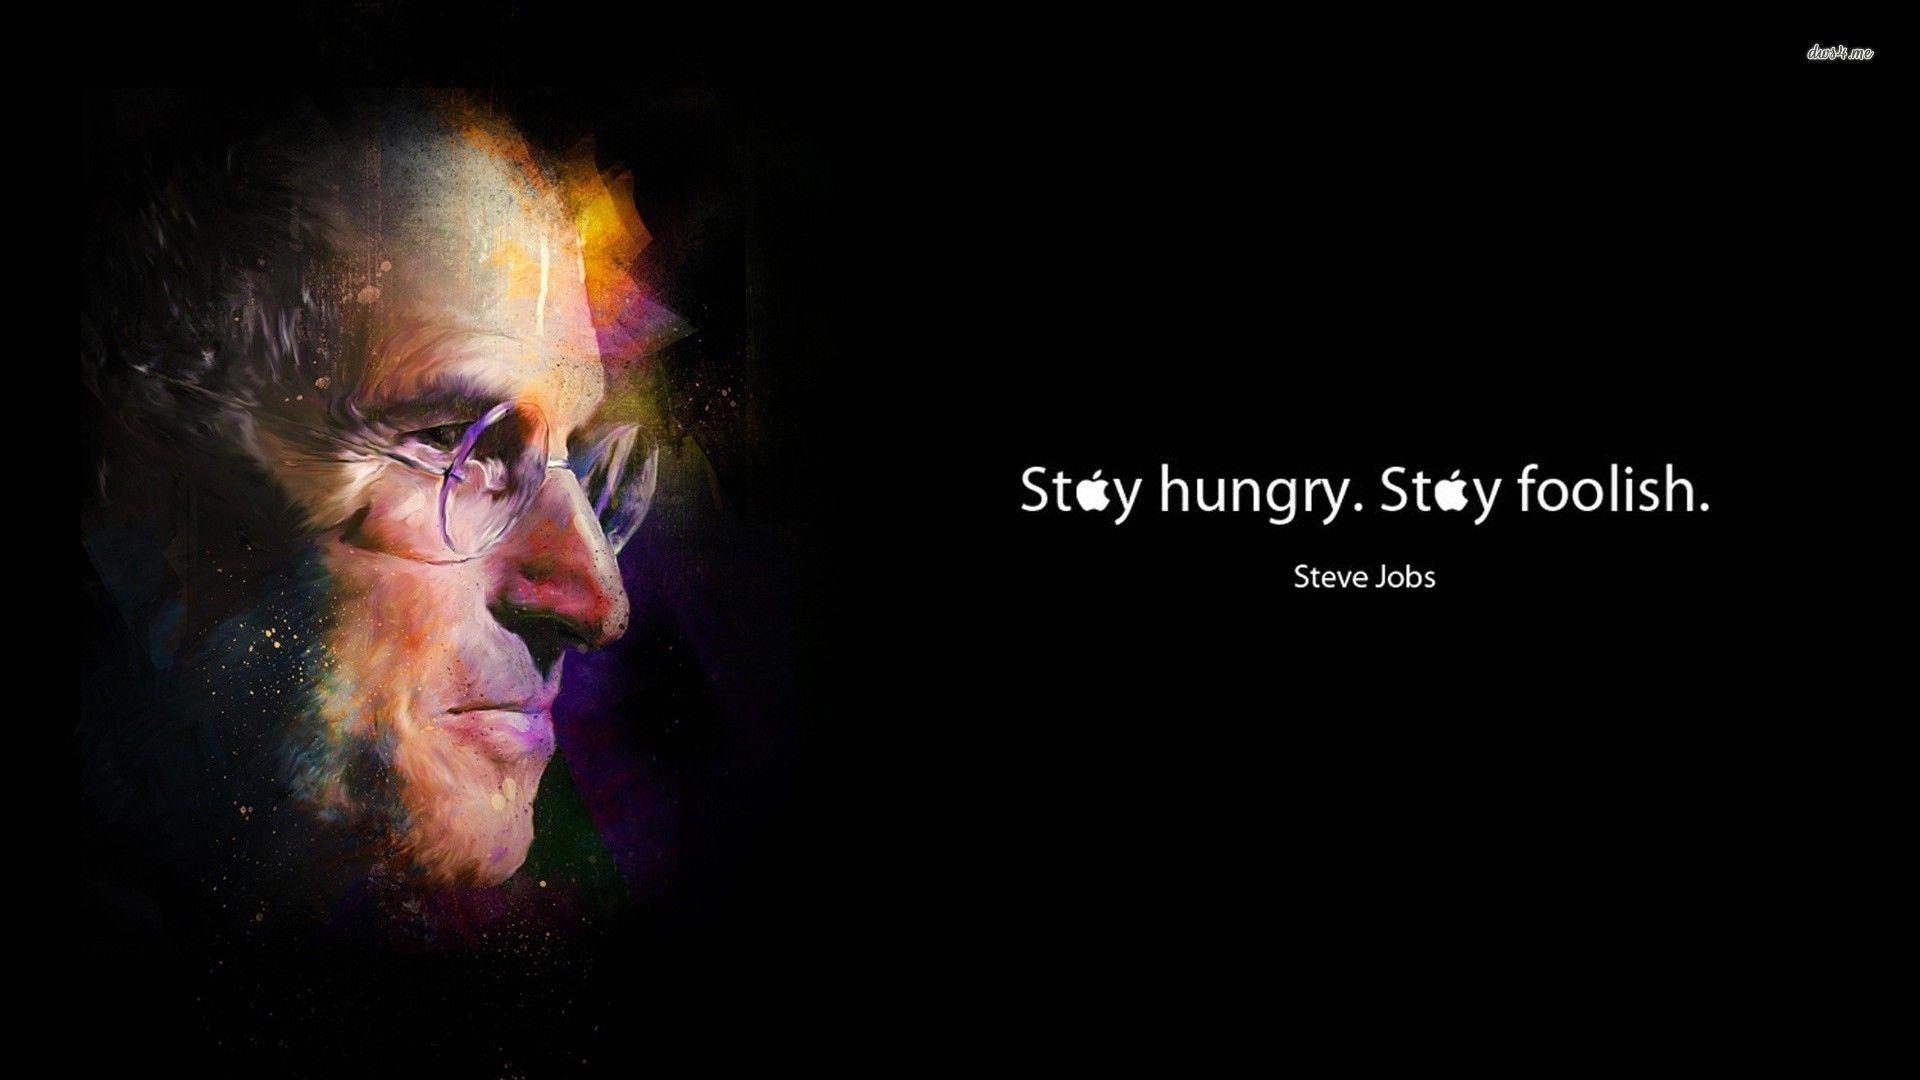 Steve Jobs Strategy Quotes. QuotesGram